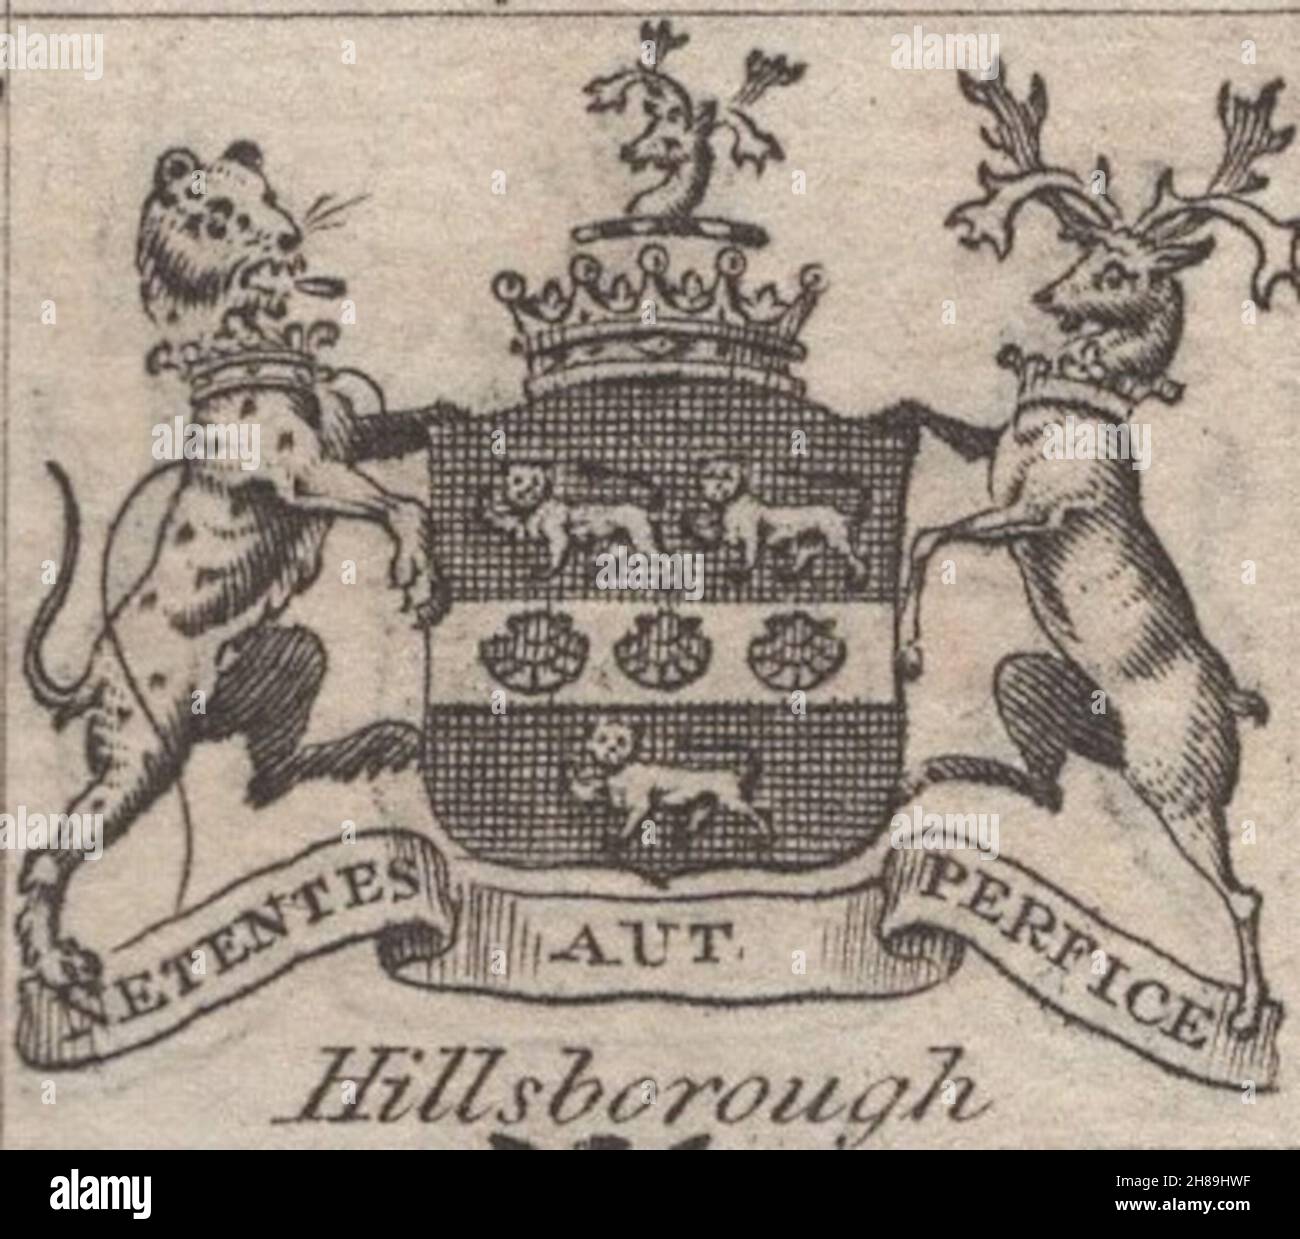 antique 18th century engraving heraldy coats of arms, English Earls , Motto / slogan: Ne tentes Aut Perfice. Hillsborough.  by Woodman & Mutlow fc russel co circa 1780s Source: original engravings from  the annual almanach book. Stock Photo